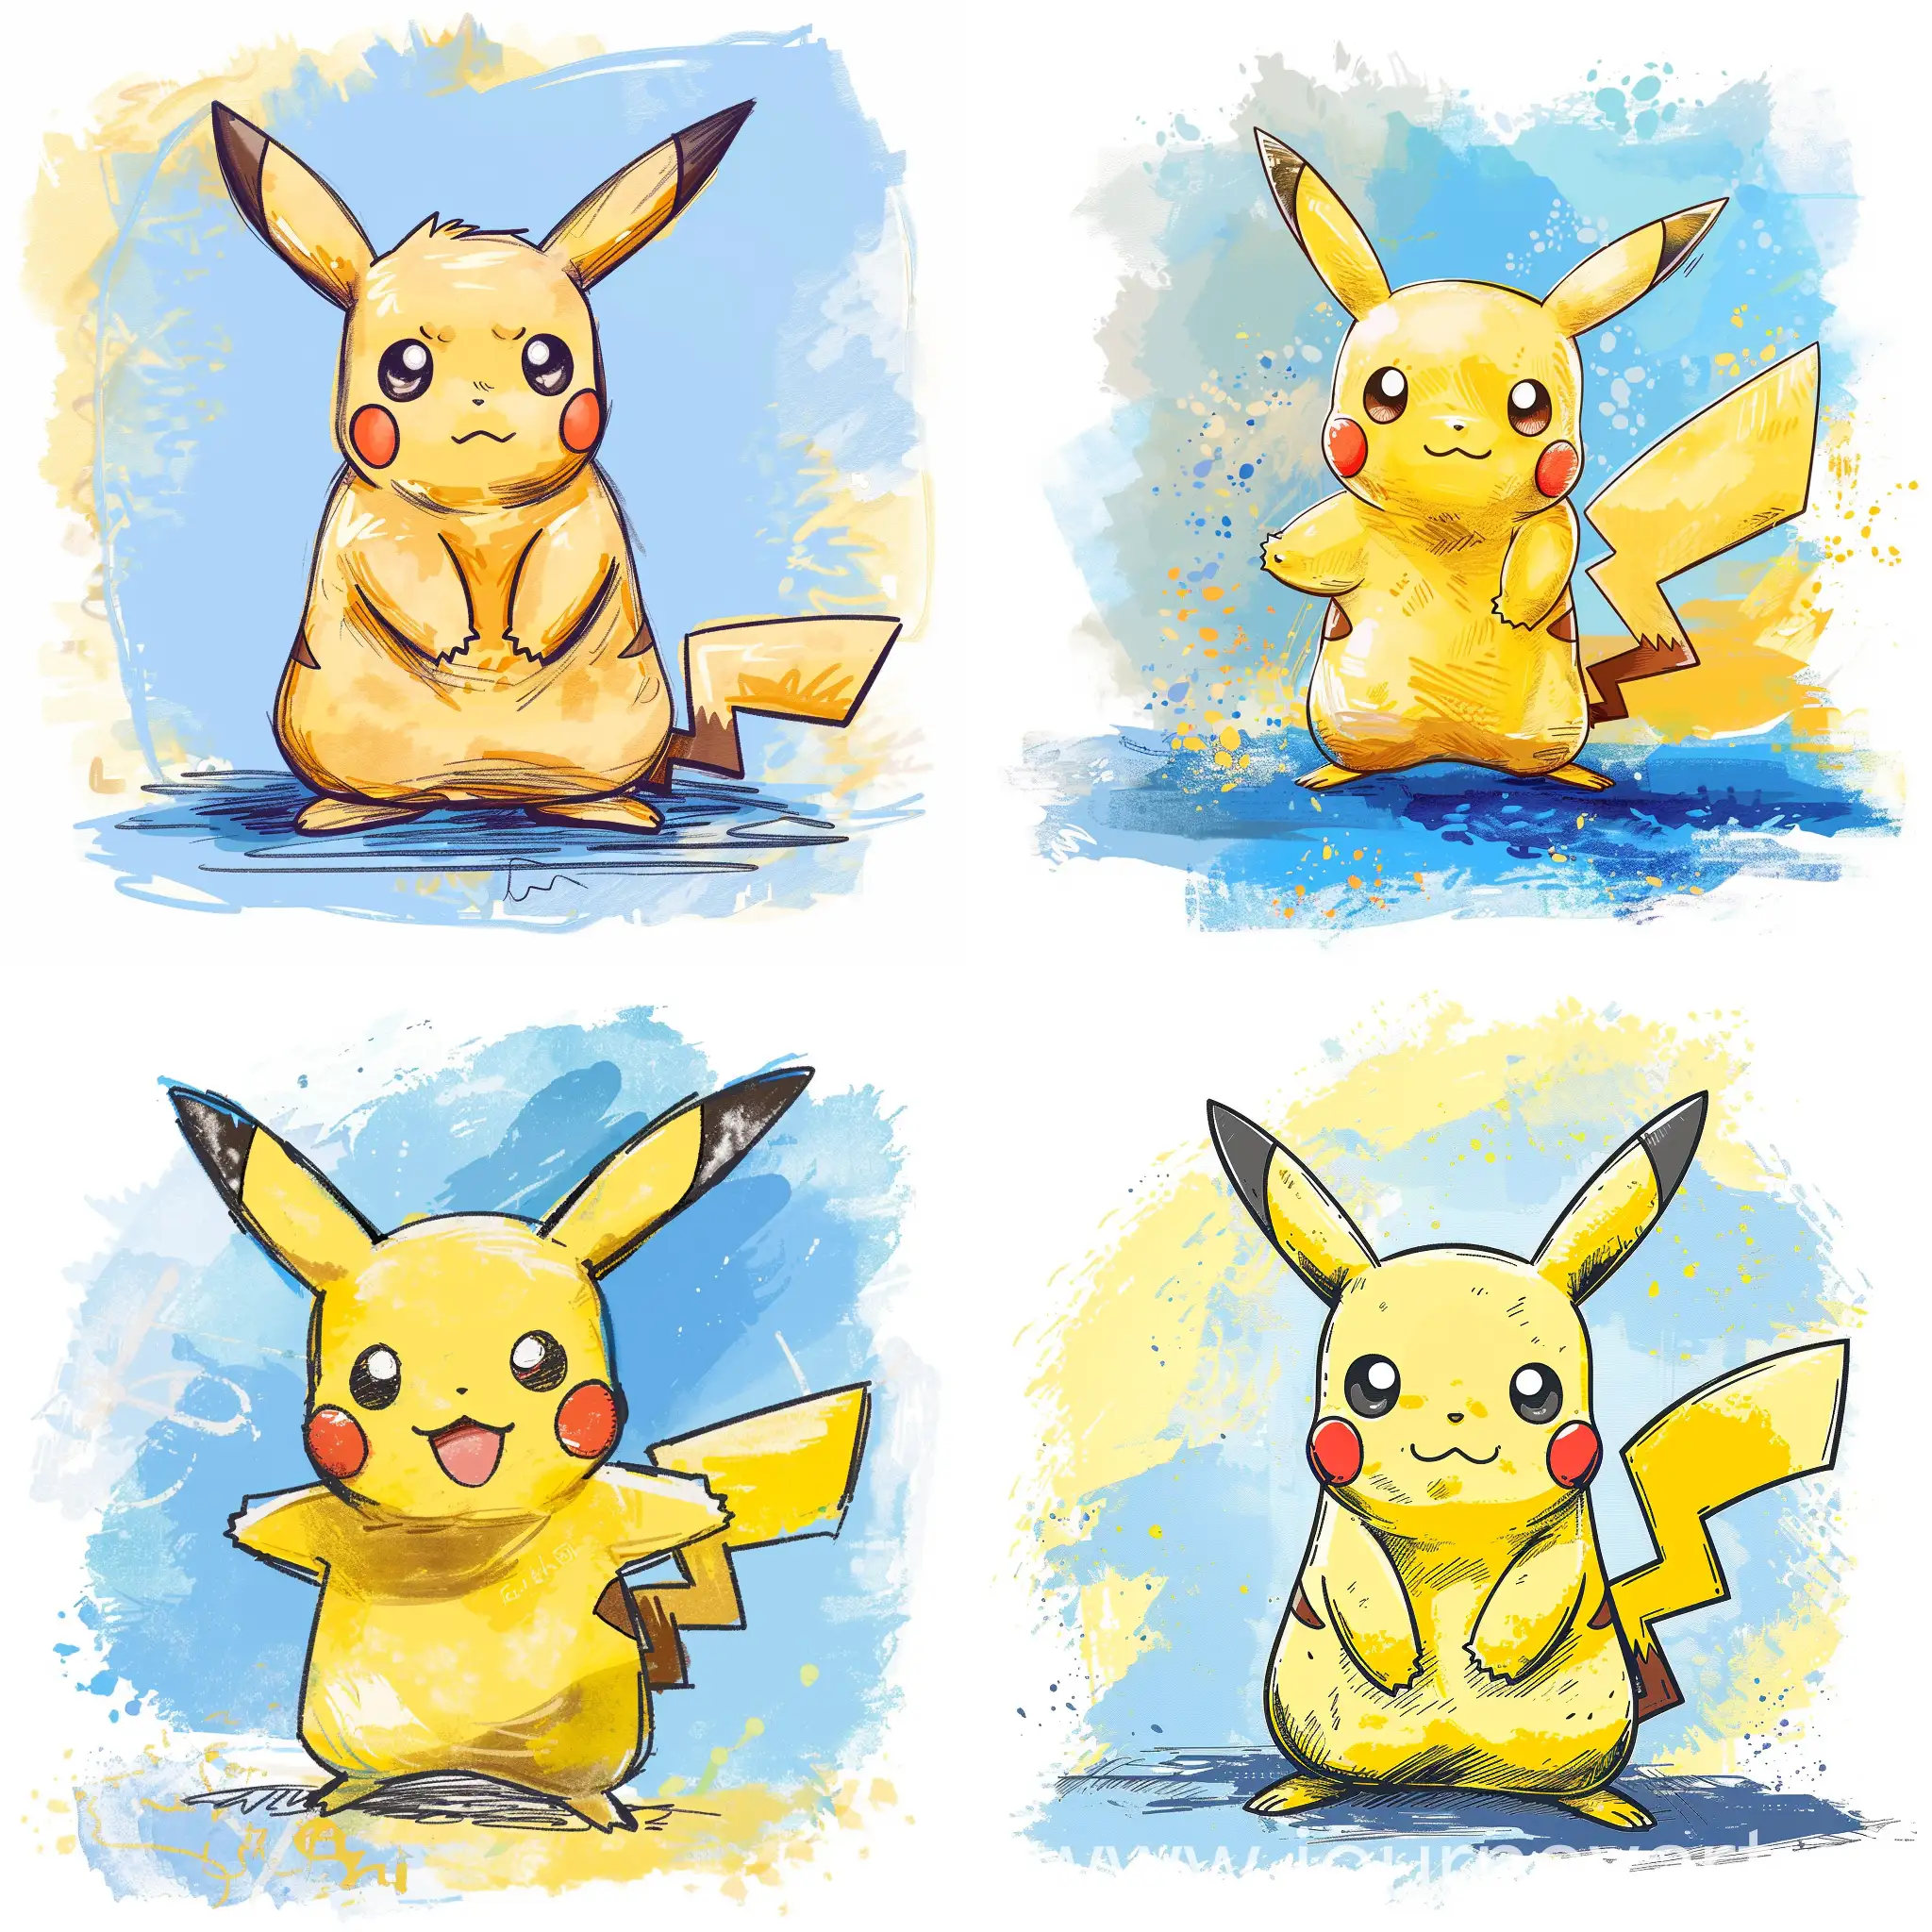 Adorable-Pikachu-Drawing-in-Watterson-Style